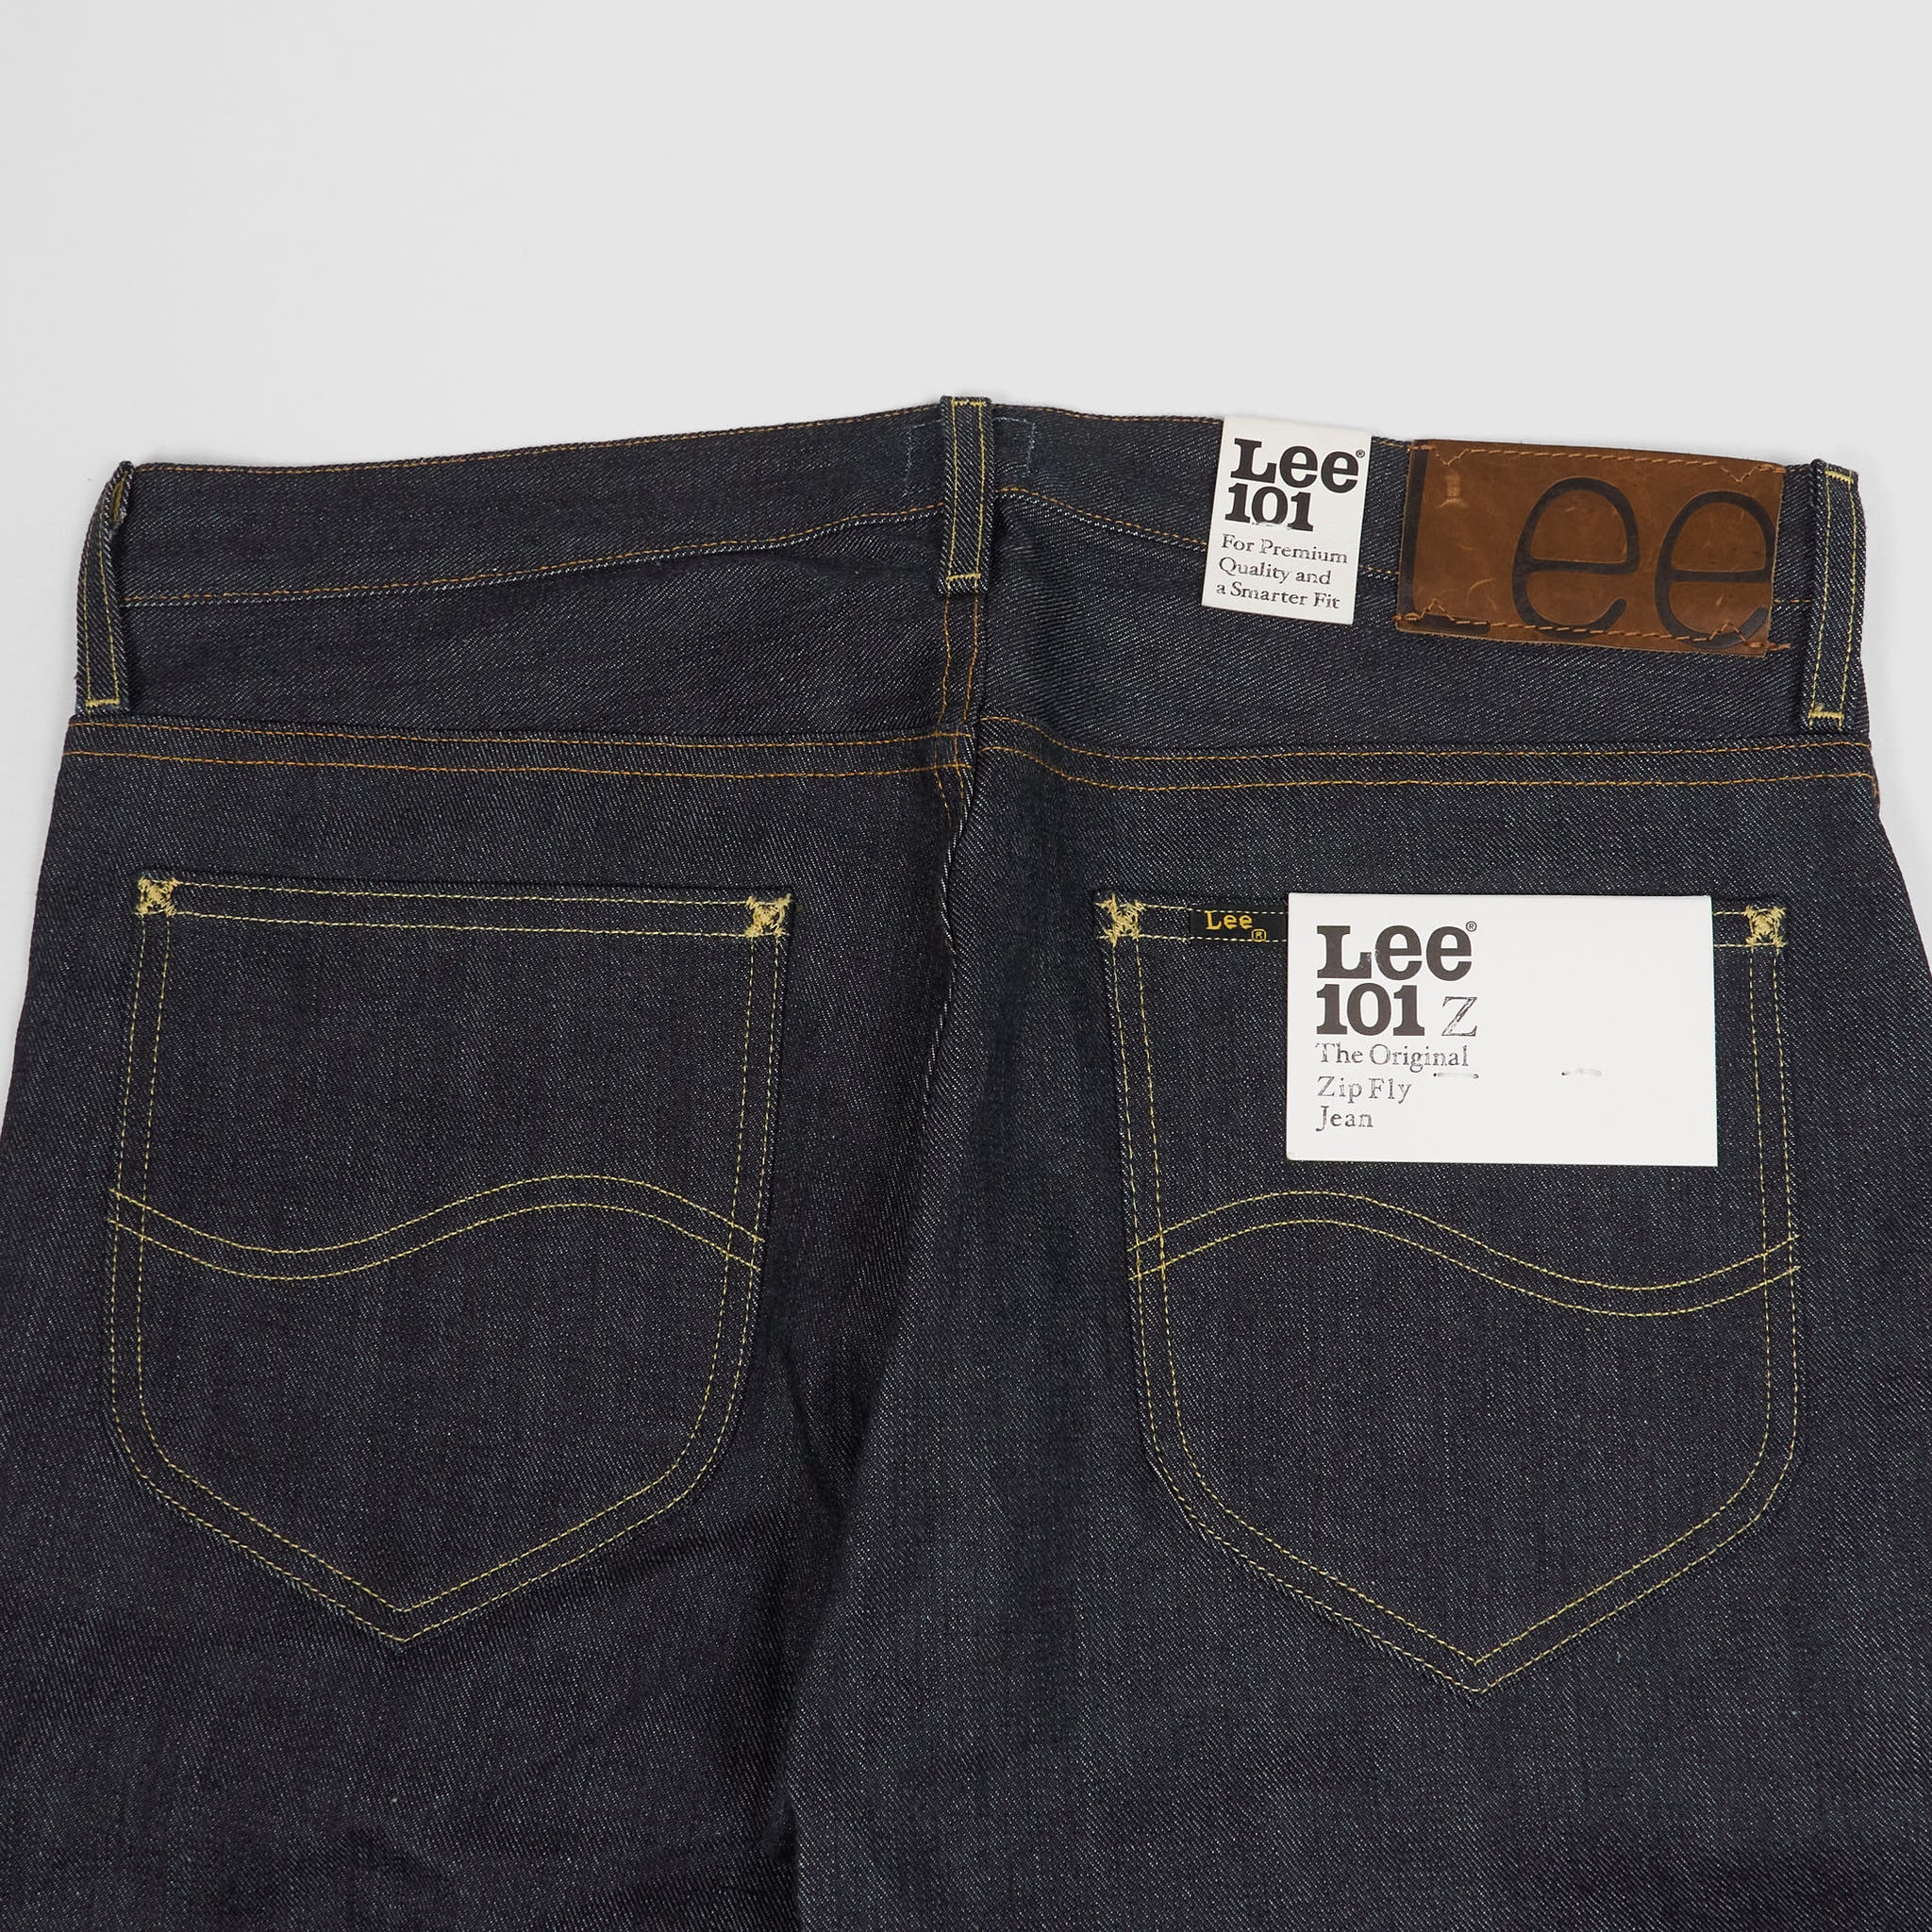 Lee 101 Z The Original Zip Fly Raw Selvage Denim Jeans - DeeCee style